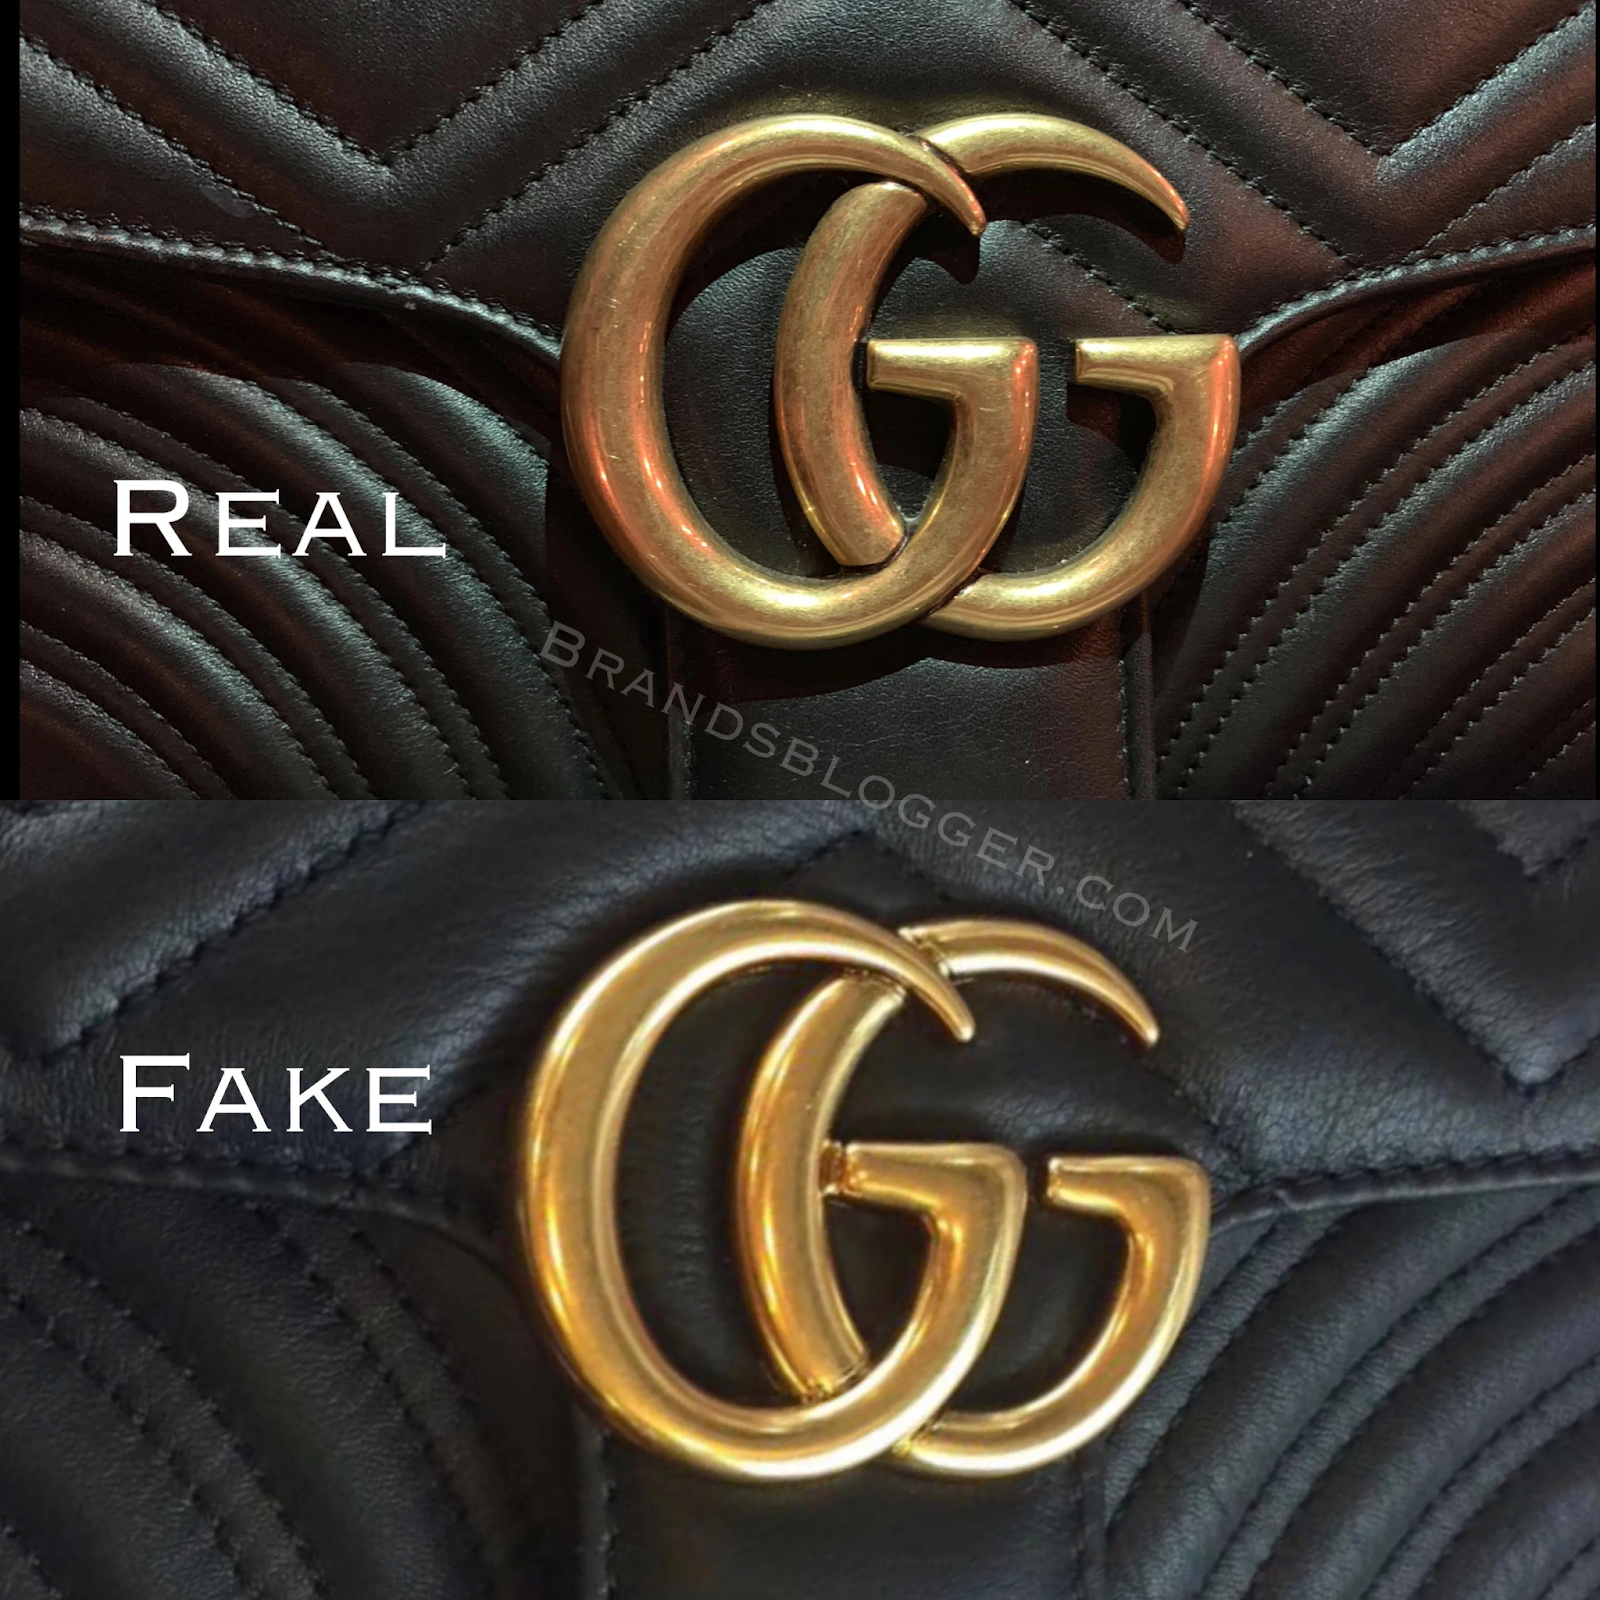 Real vs. Fake Gucci Bags 2021: Check Authenticity, Serial - Daily Blog Bite